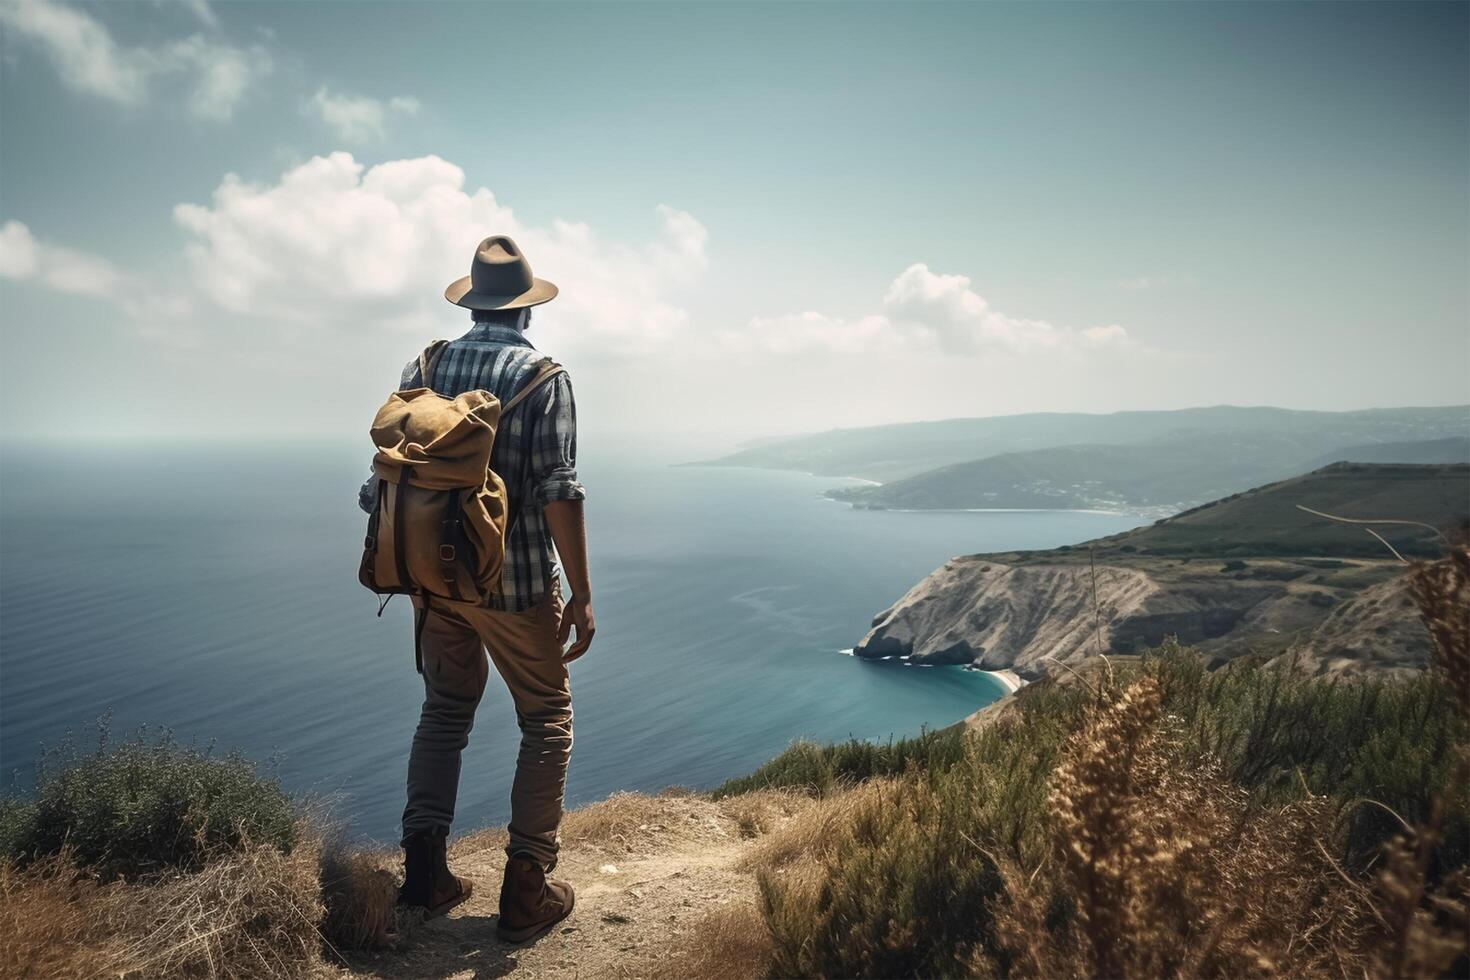 A man looks out over a mountain and the ocean. adventure trip, summer vacation. photo